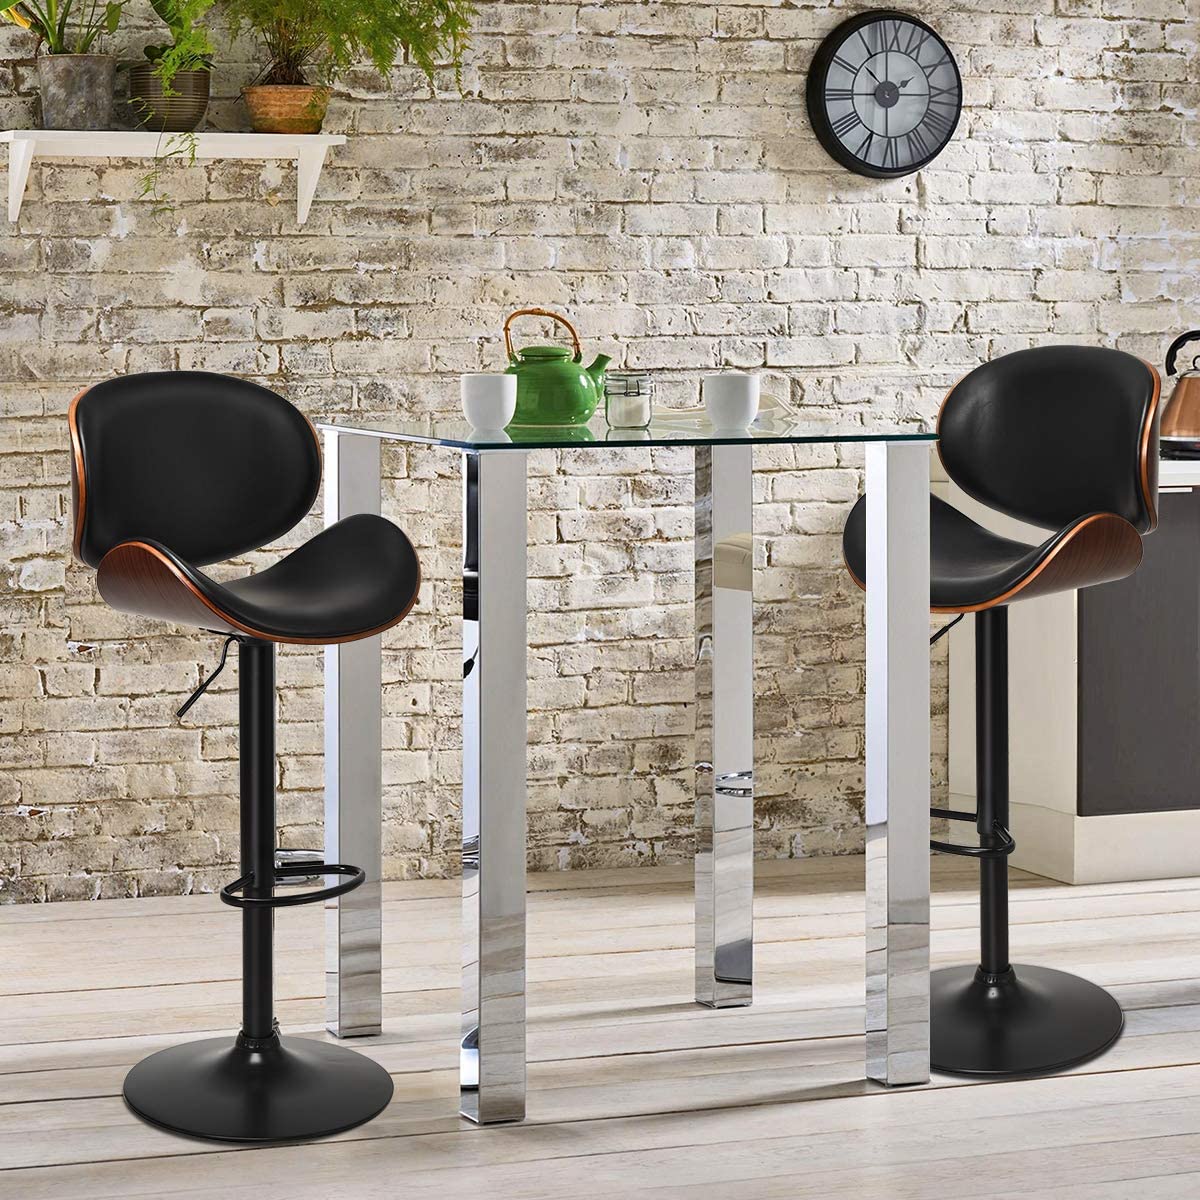 Set of 2 Bar Stools 360-degree Swivel Adjustable Barstools PU Leather Seat Dining Chairs with Curved Footrest